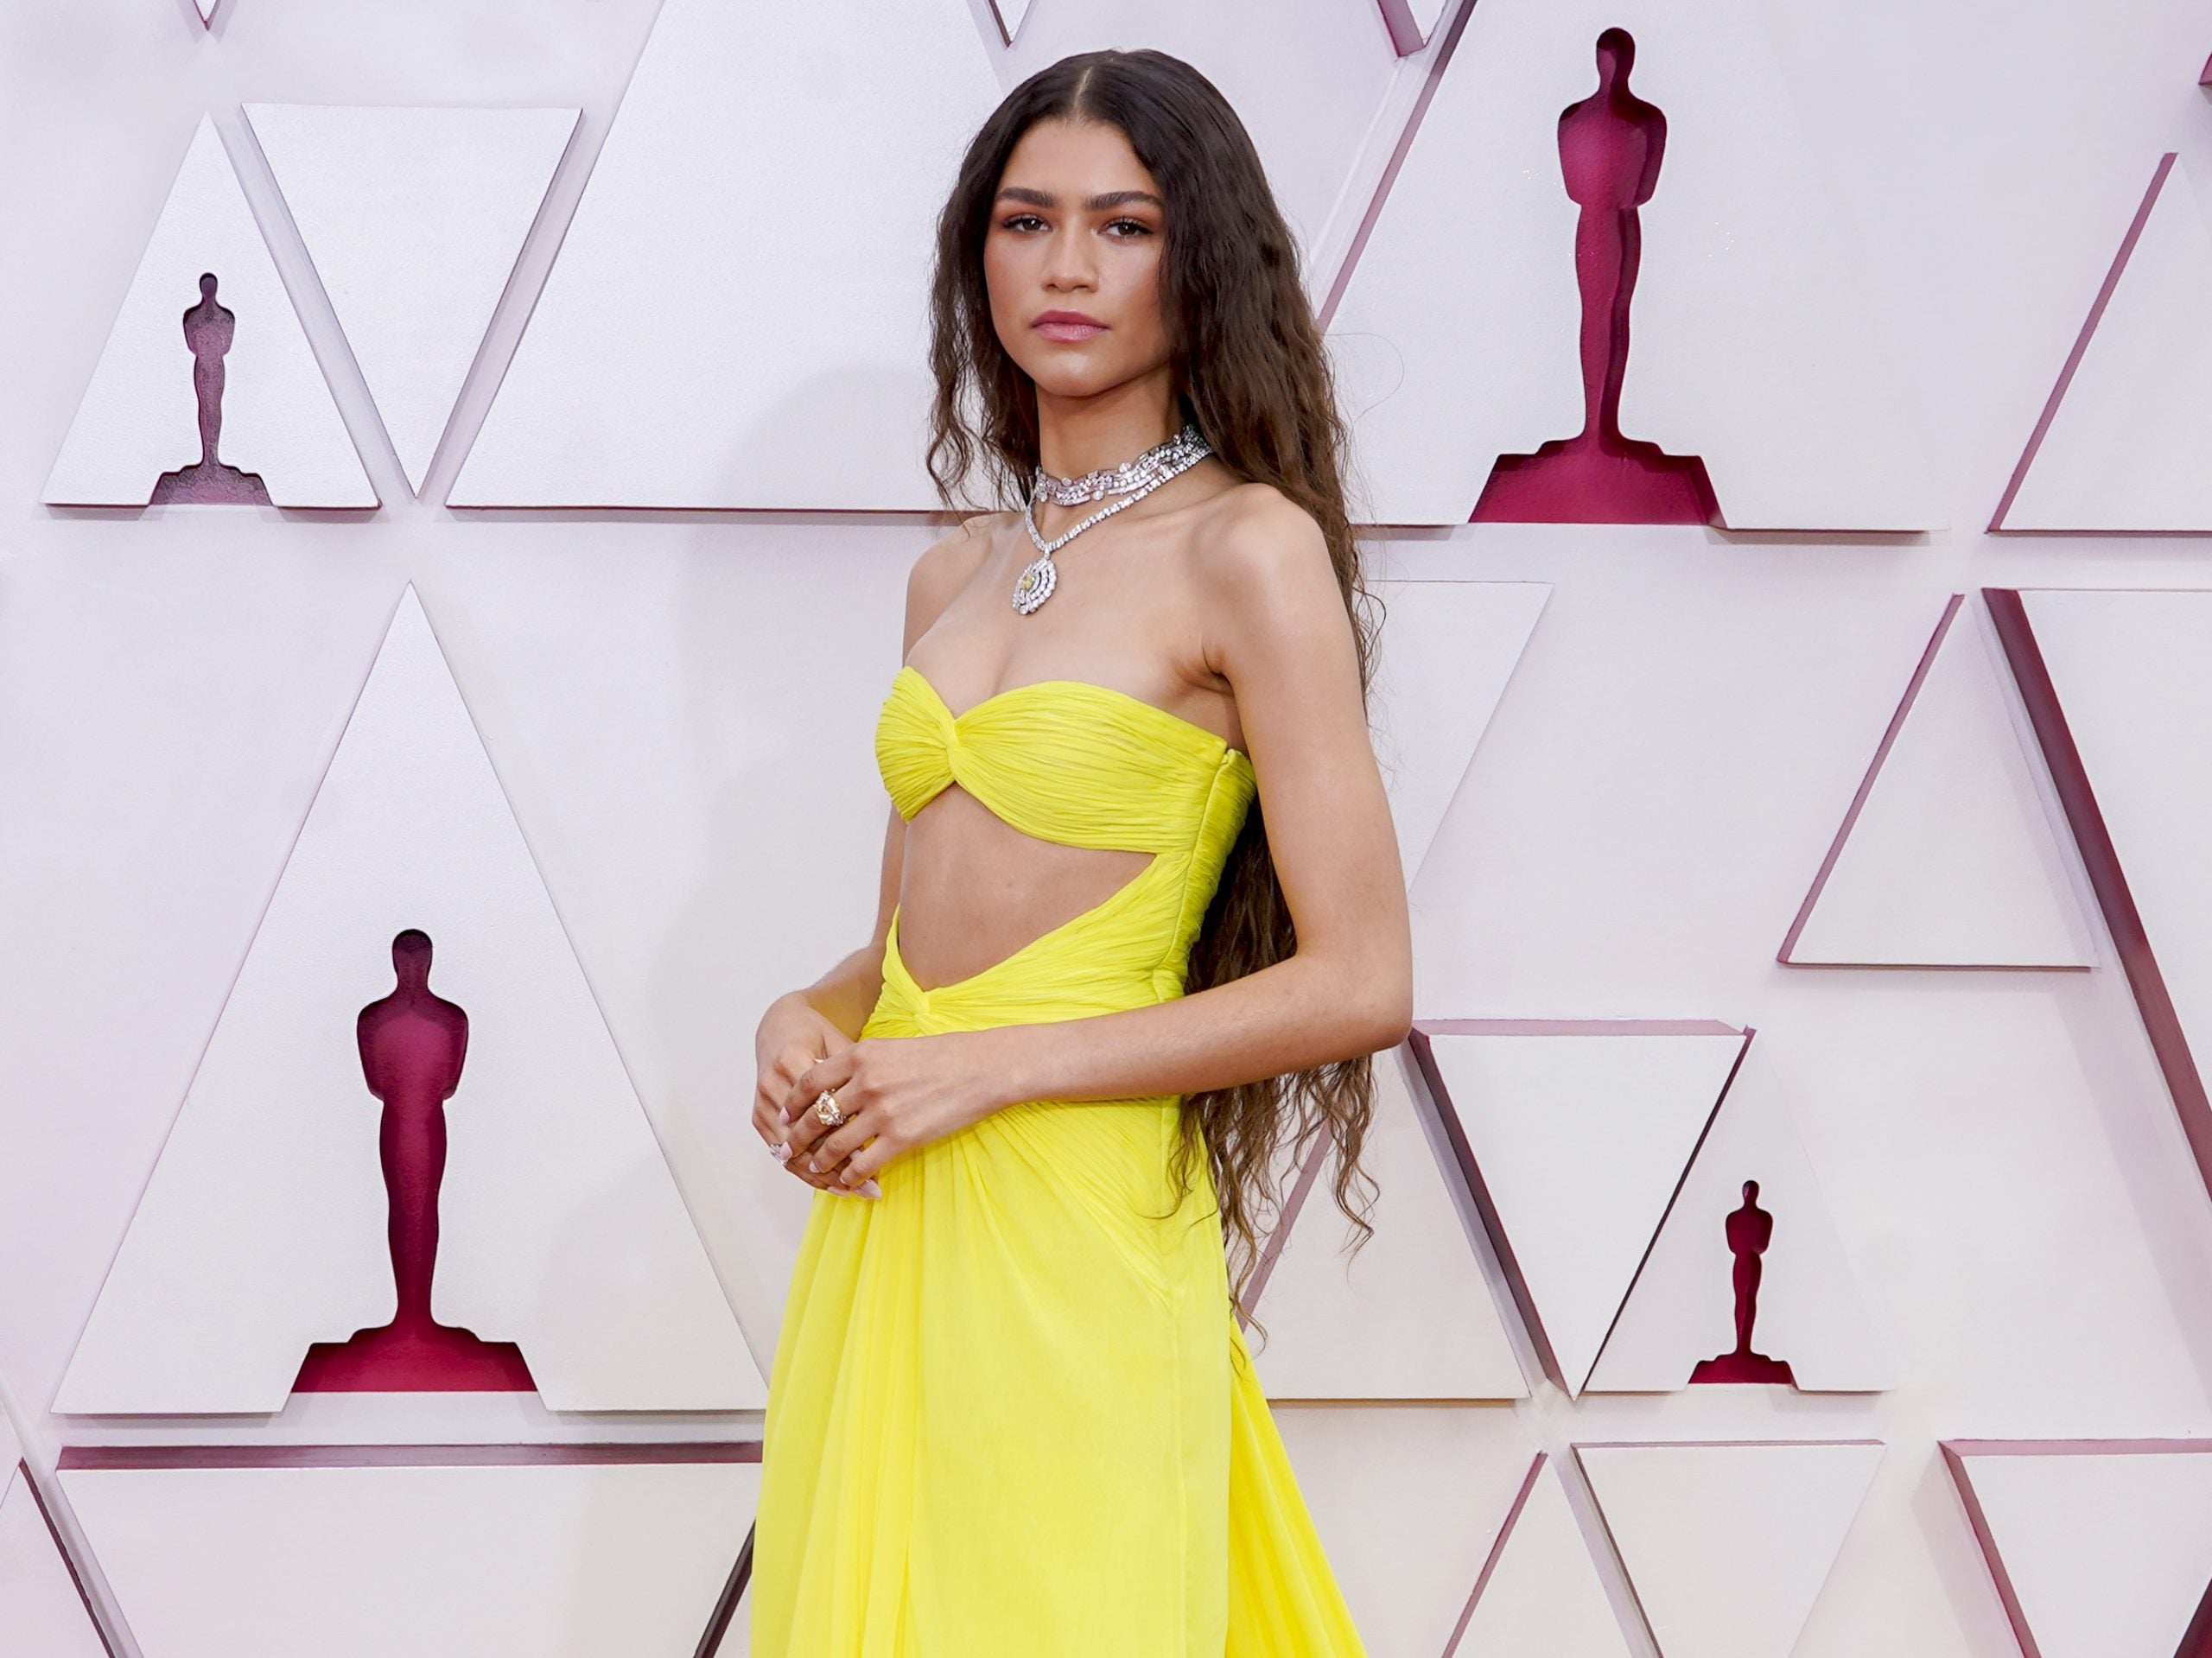 Zendaya Was Breathtaking In This Cher-Inspired Valentino Gown At The 2021 Oscars